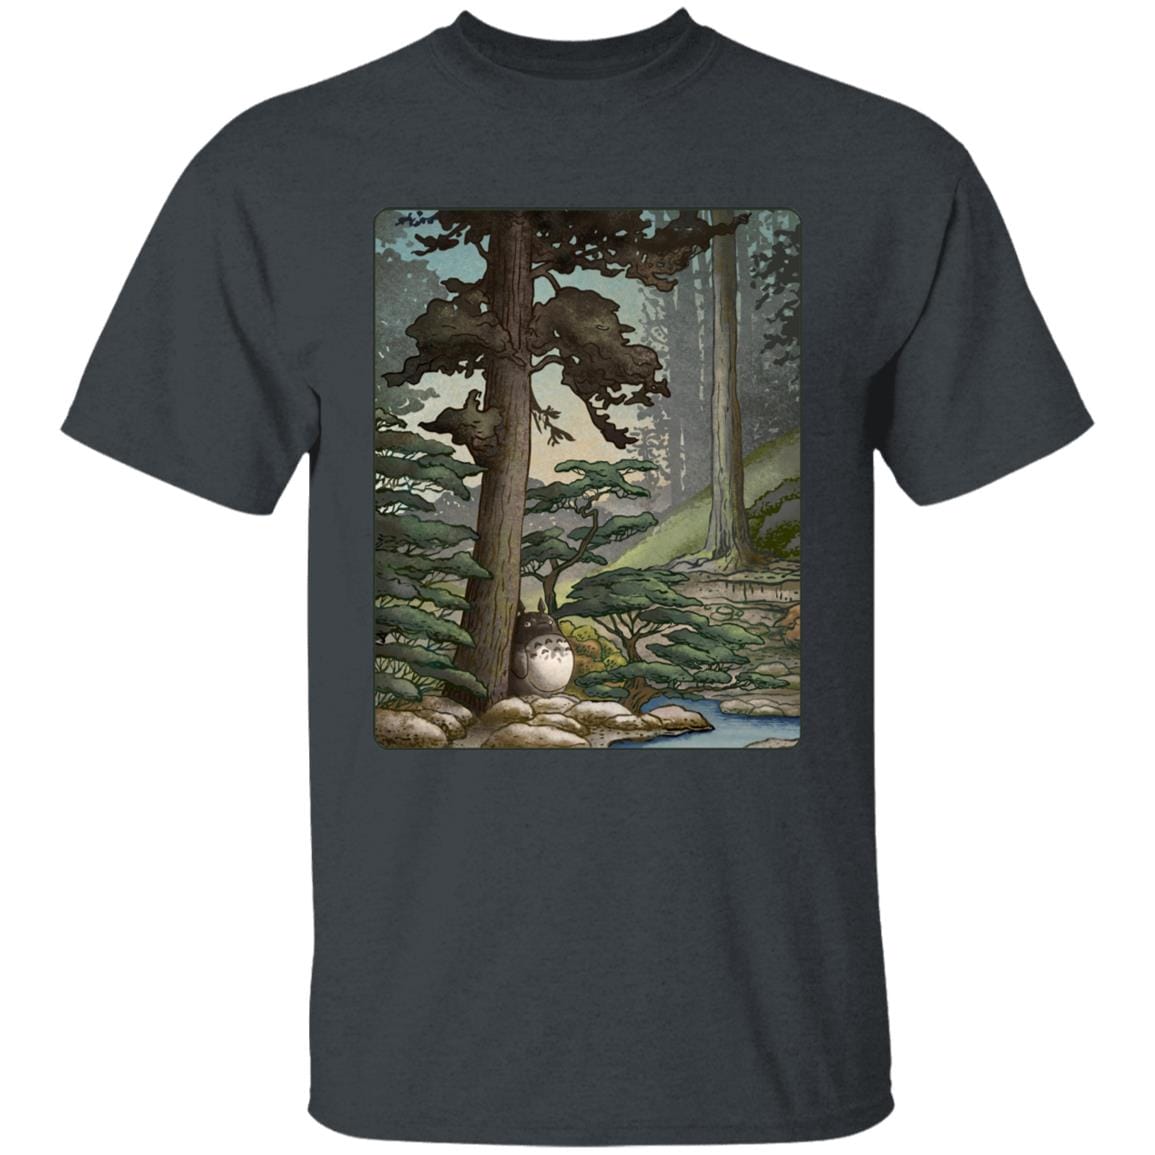 Totoro in the Landscape T Shirt